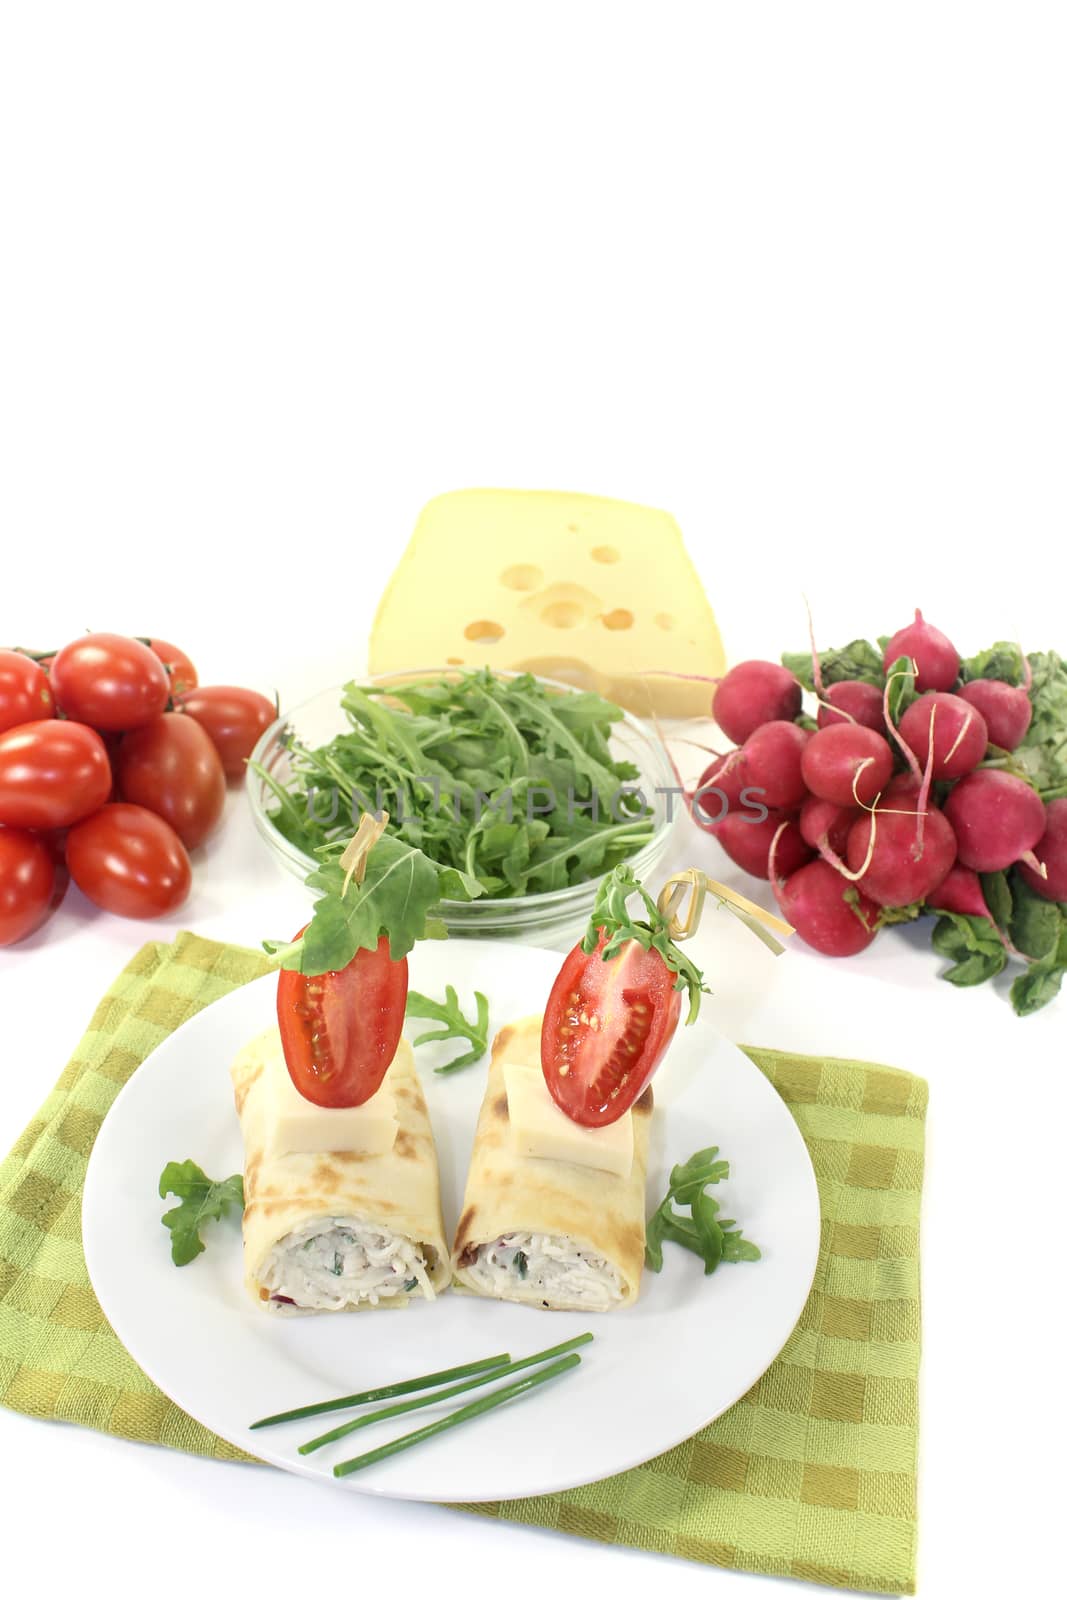 stuffed cheese crepe rolls with arugula on a light background